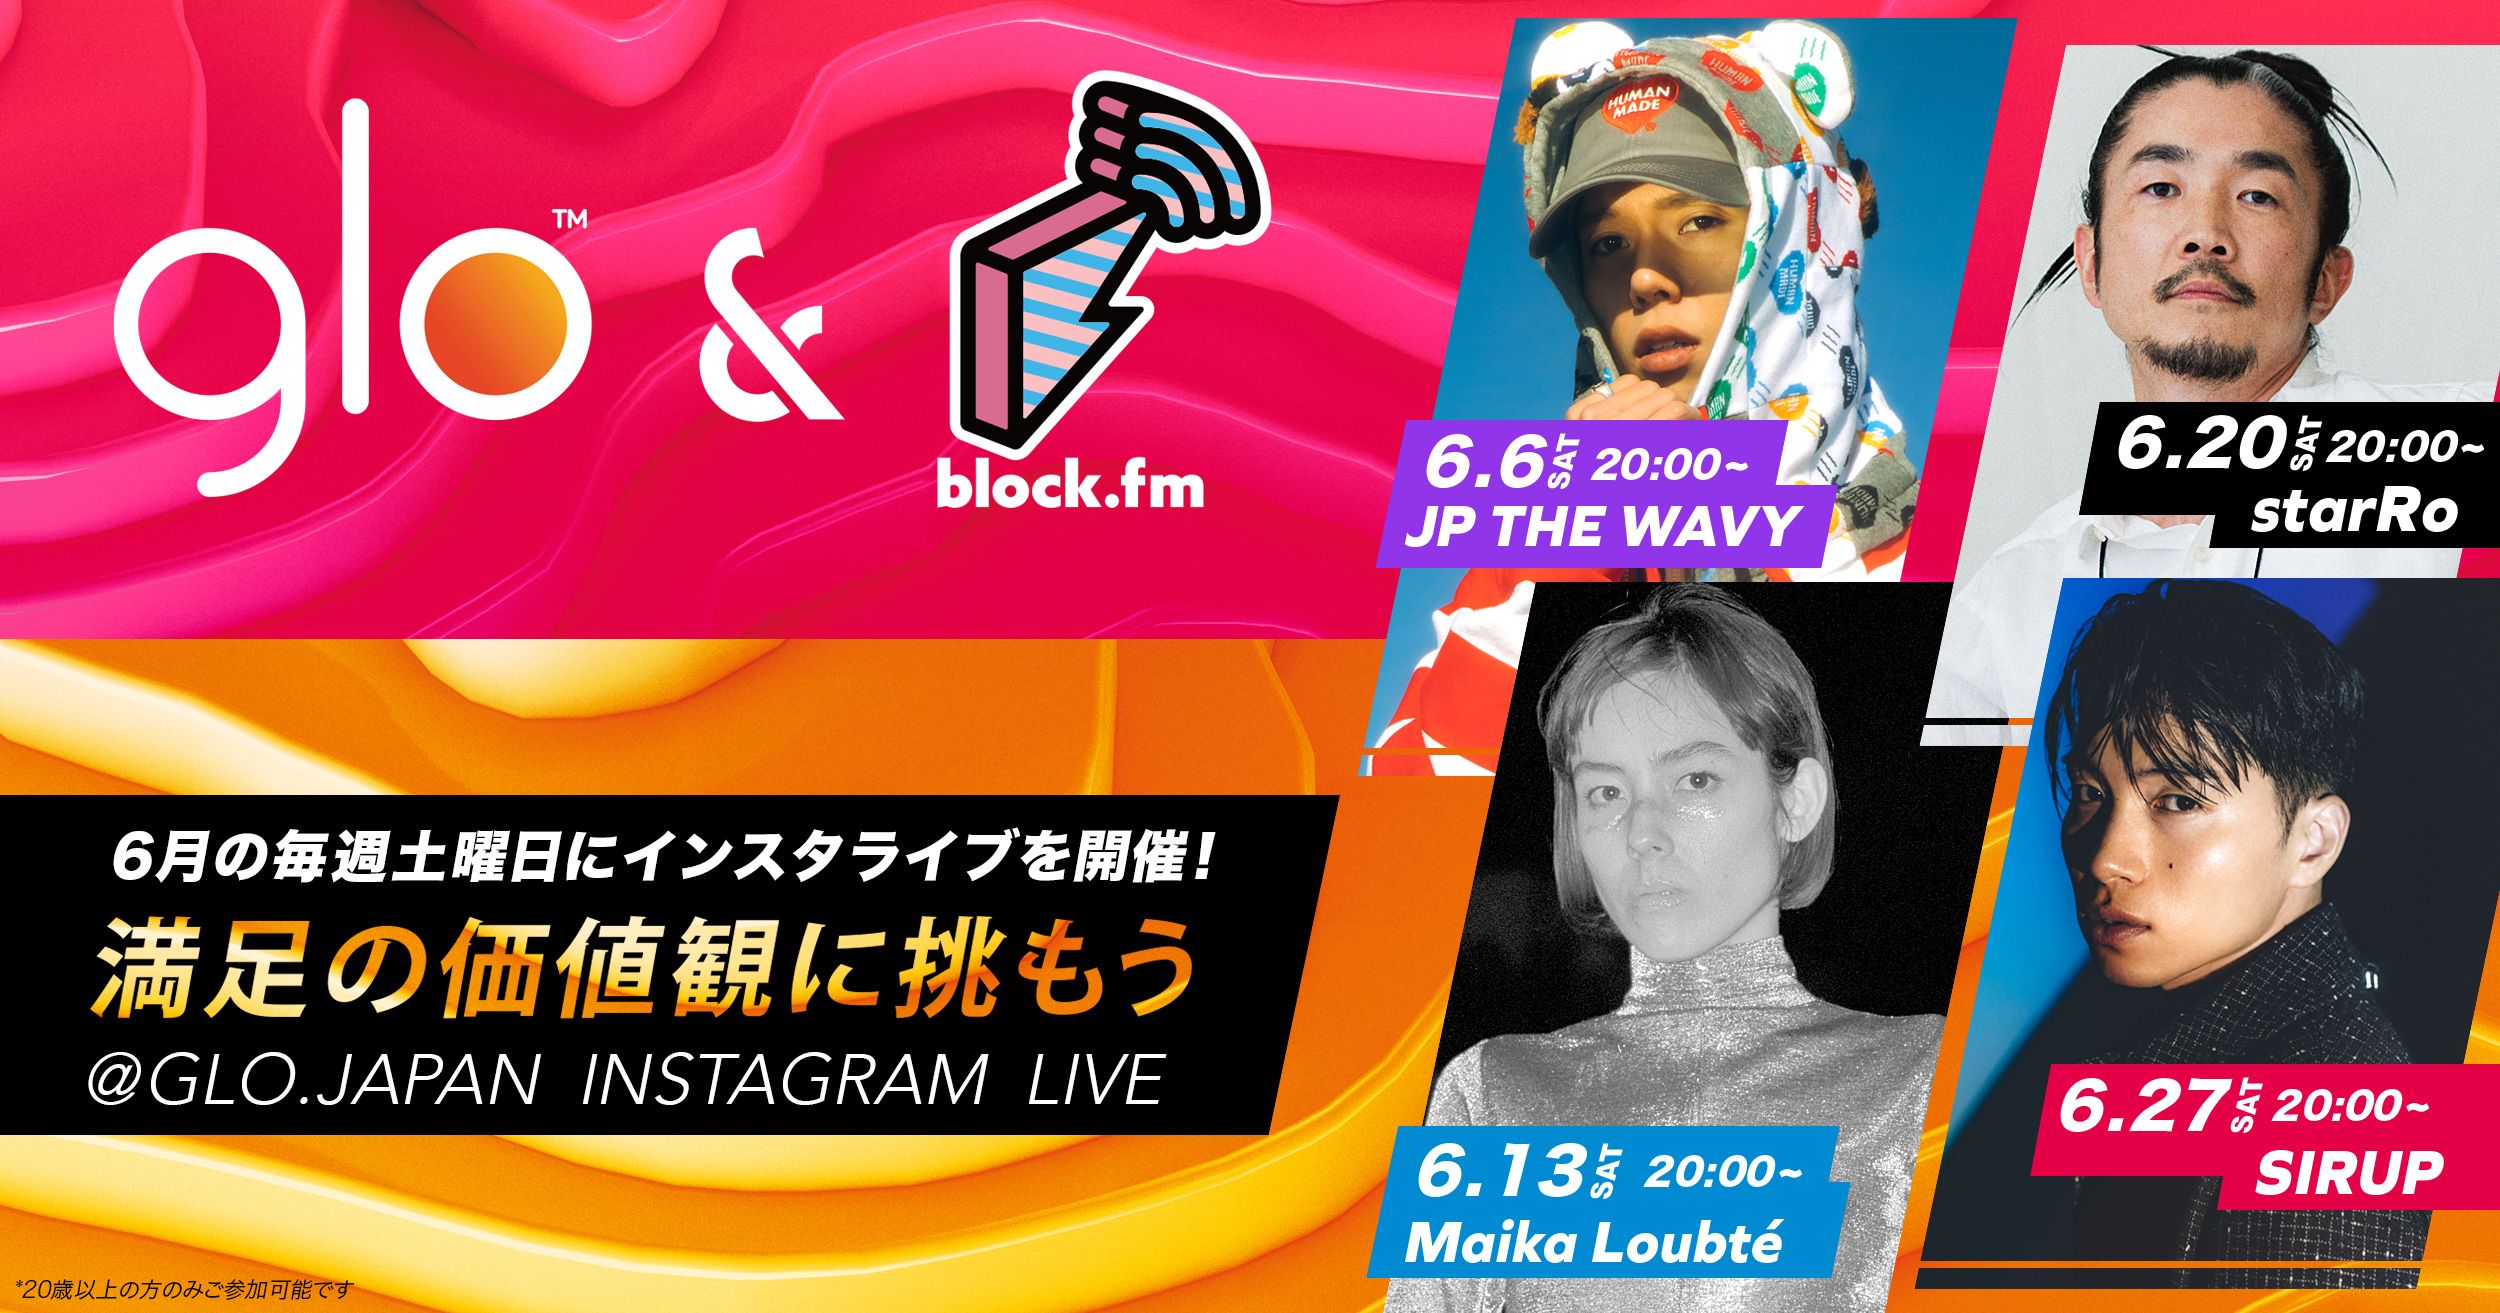 [Live Streaming] glo™ × block.fm LIVE "Defy The Rules of Satisfaction"